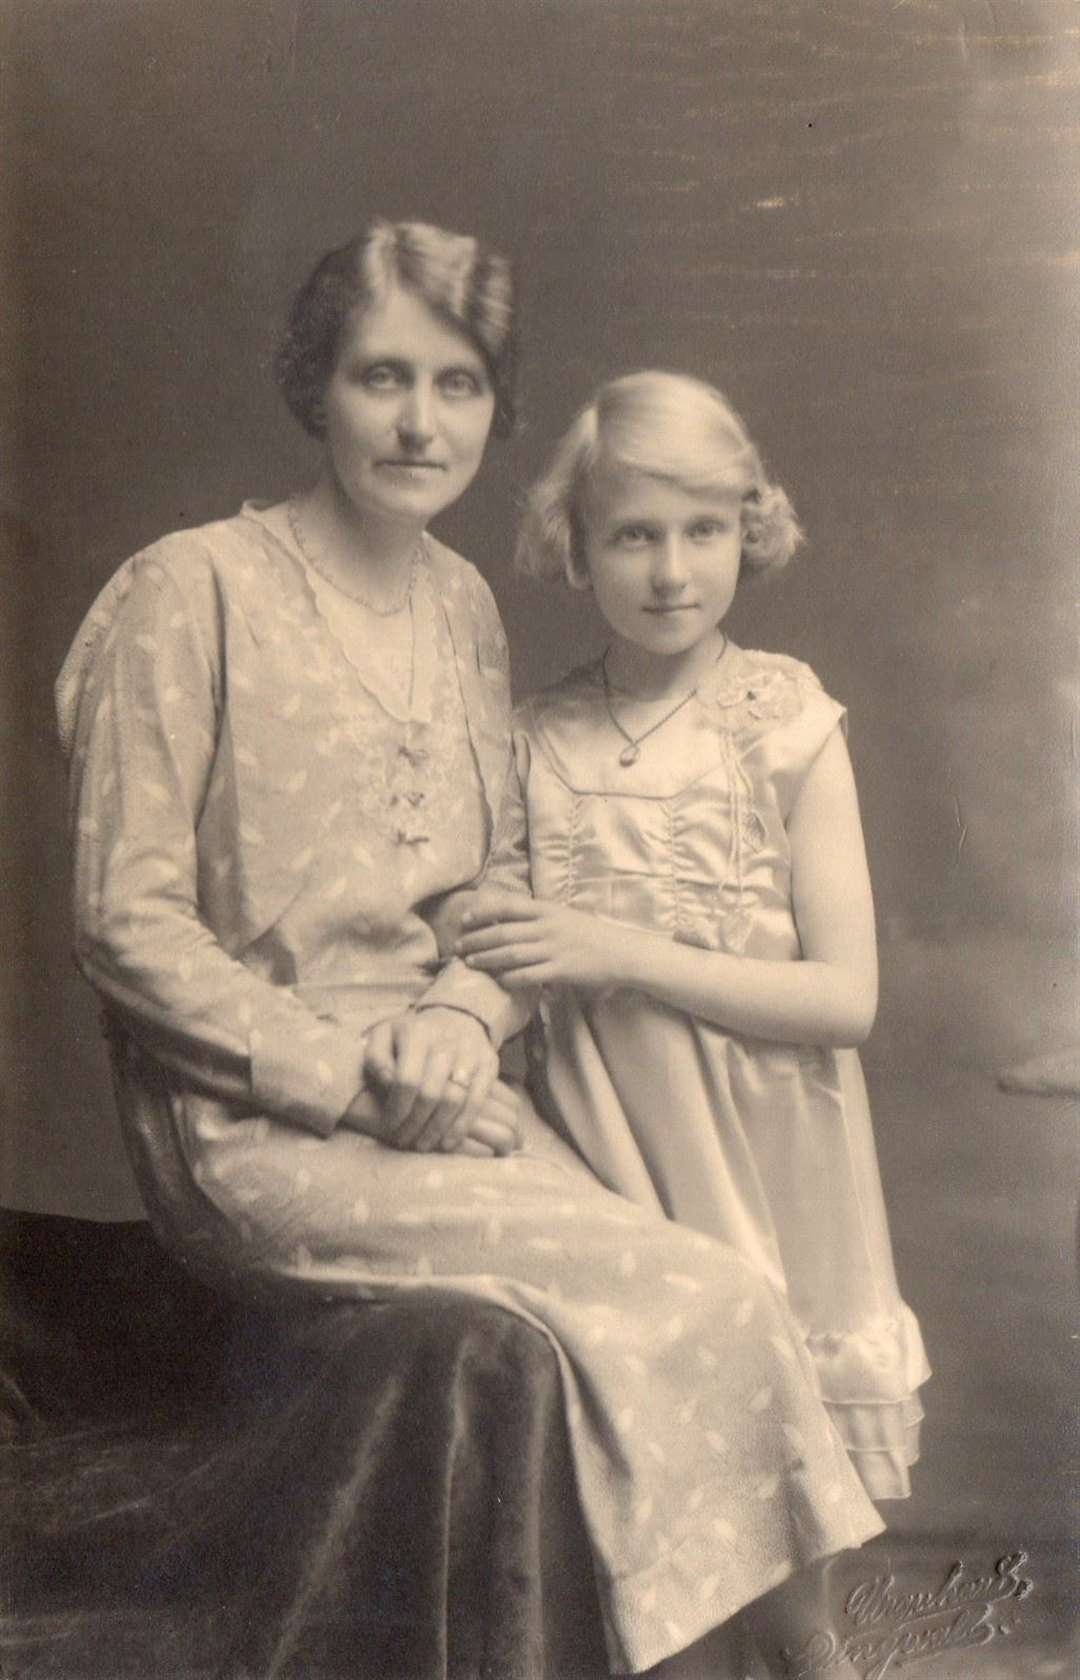 Rebecca Parker as a child with her mother, Isabella MacLennan, an accomplished pianist from Skye.